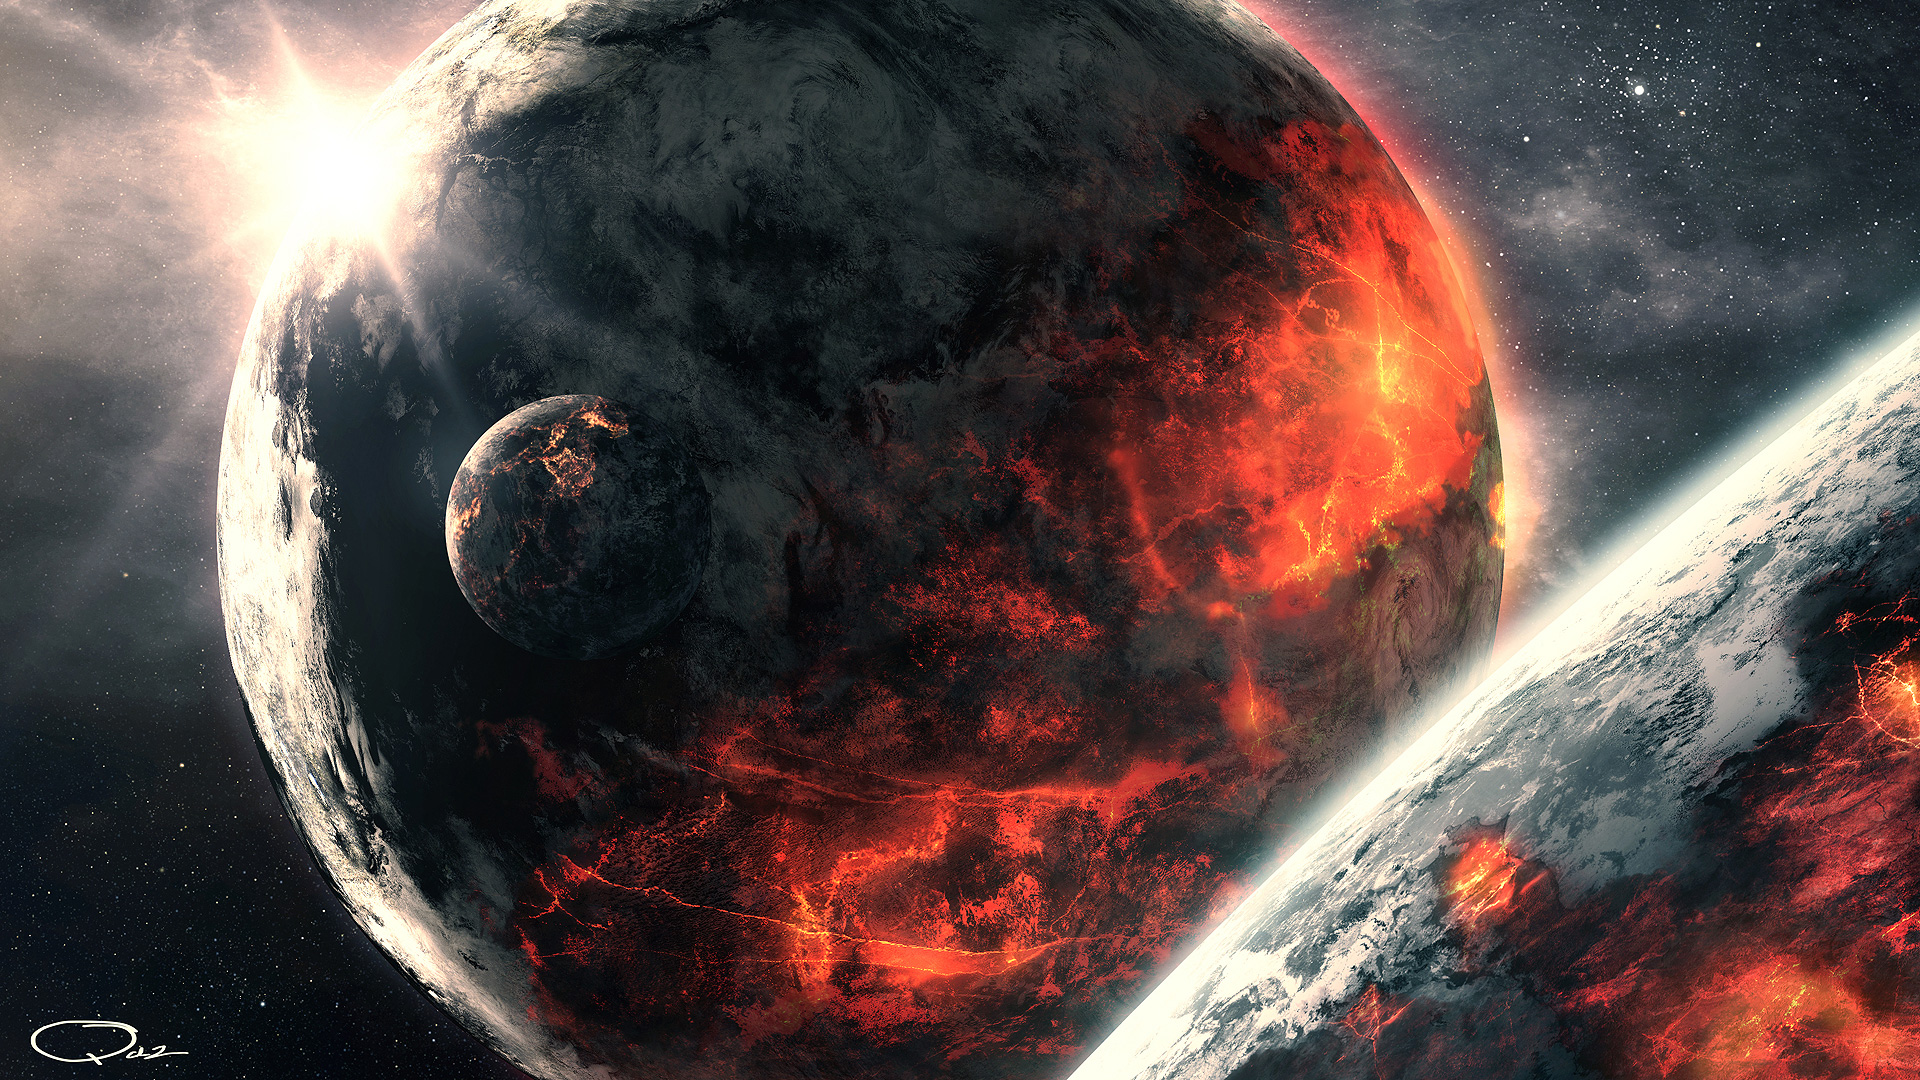 space 1080p wallpaper full hd volcanic planet in space 1920x1080